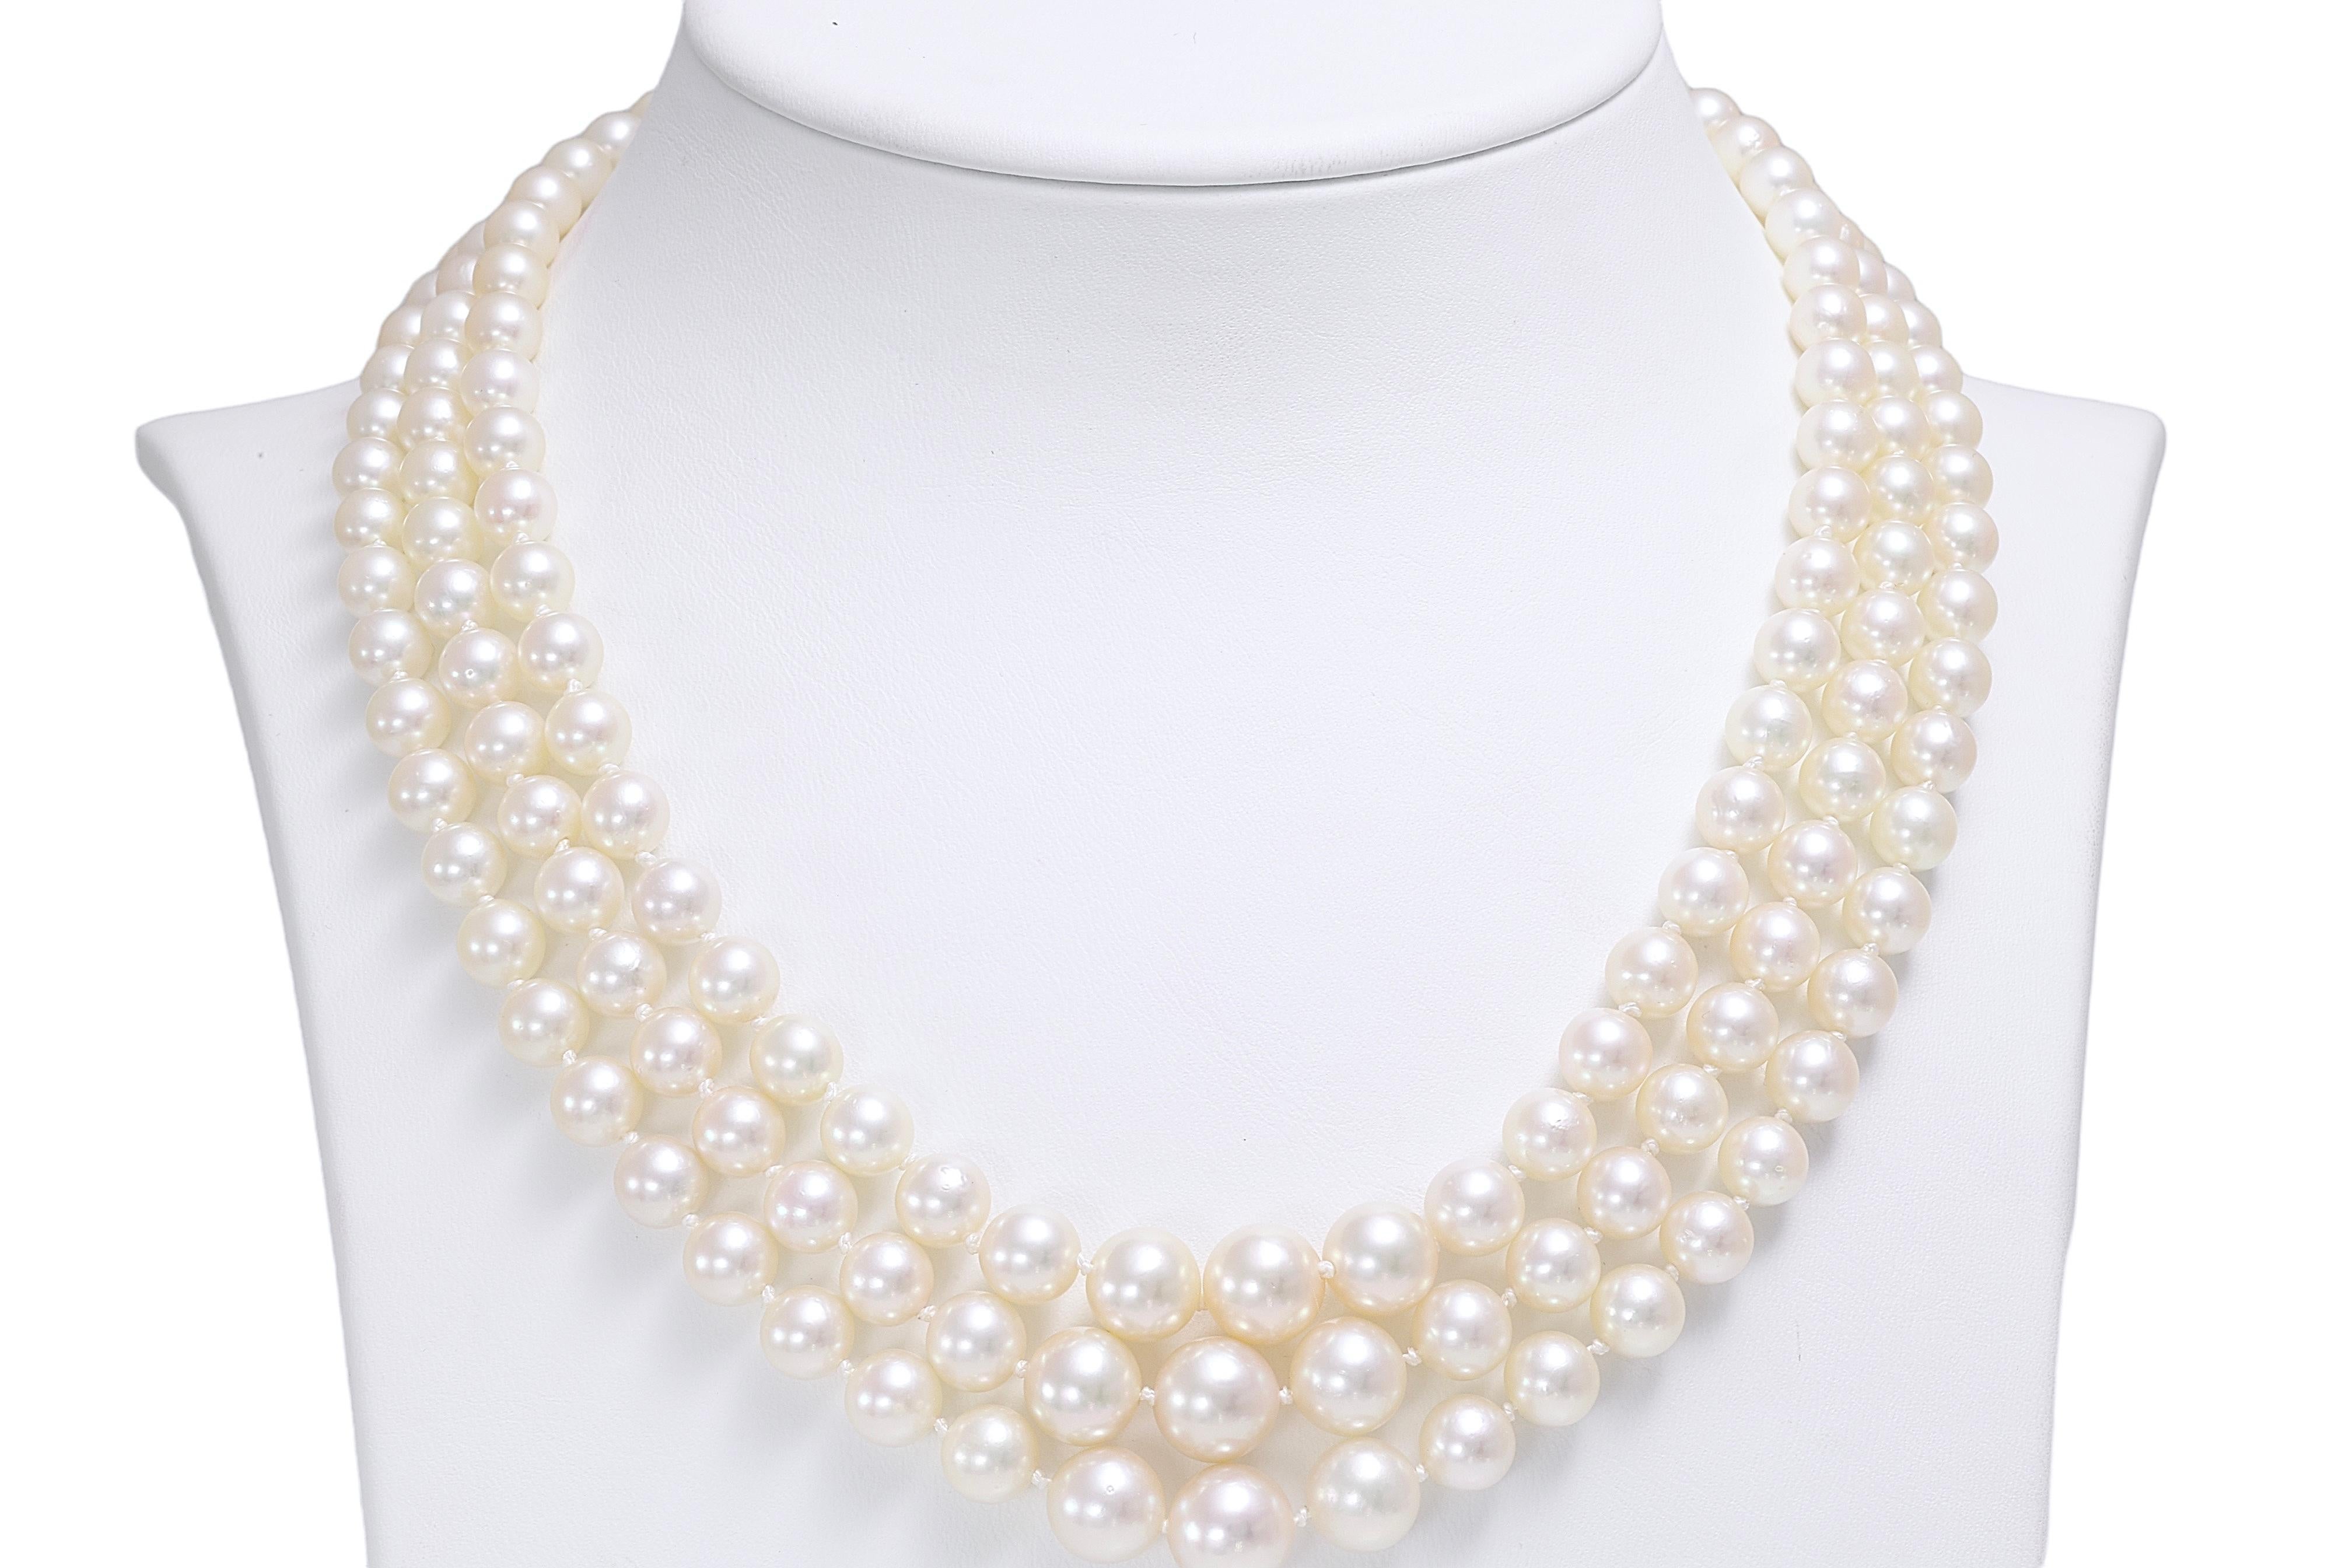 Women's or Men's 18 kt. White Gold Akoya Degradé Pearls and Diamonds 3 Strand Necklace For Sale